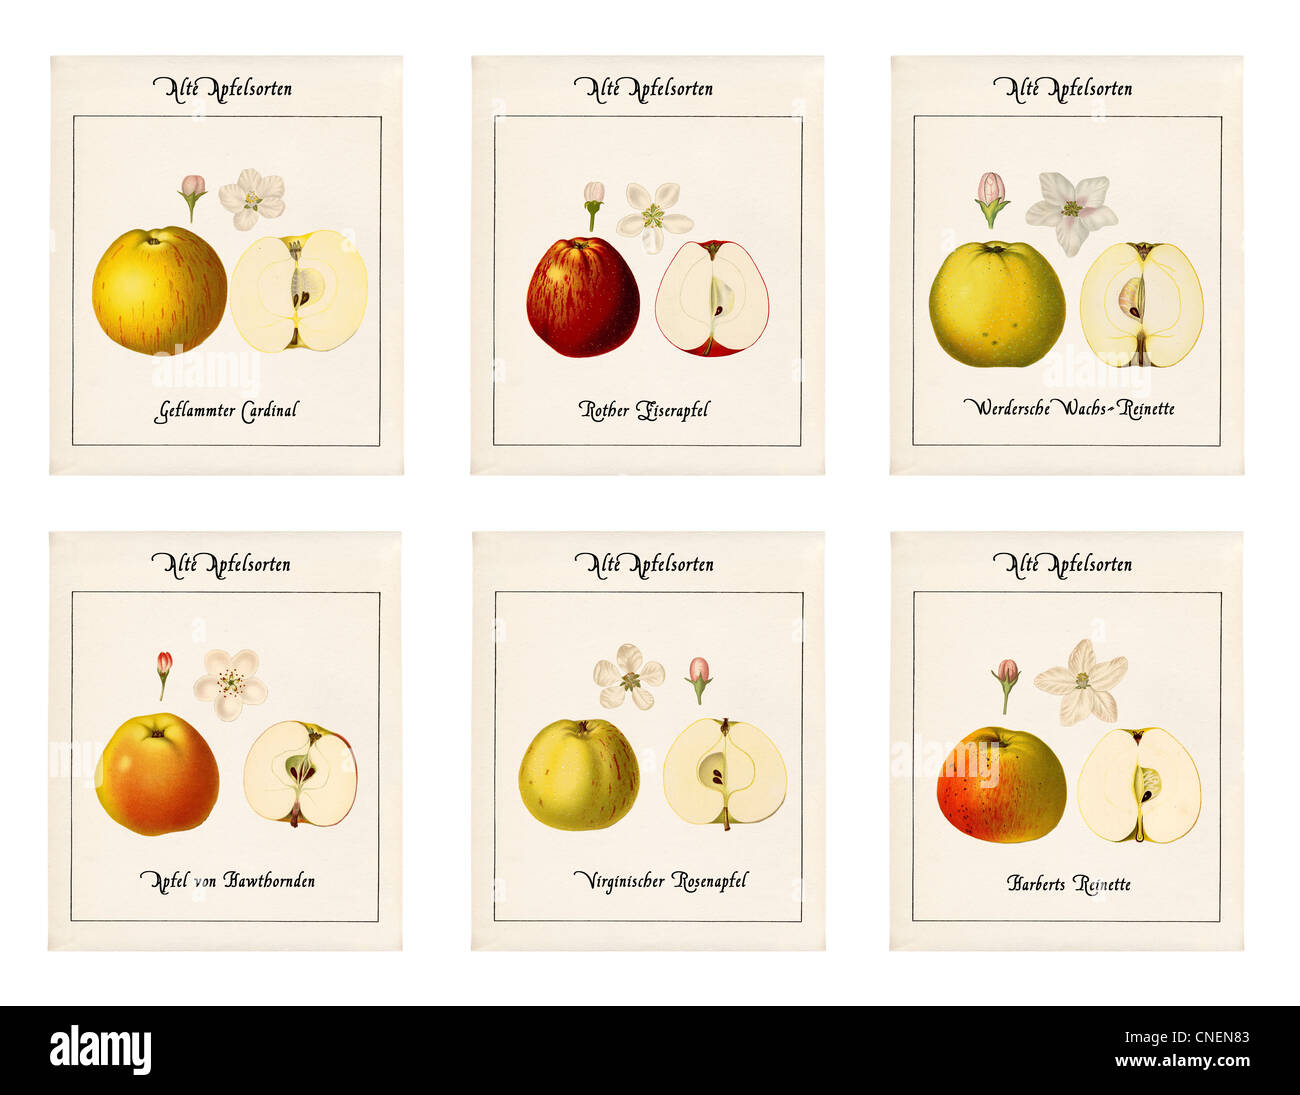 6 plates with illustrations of apple varieties in historic style on old paper Stock Photo